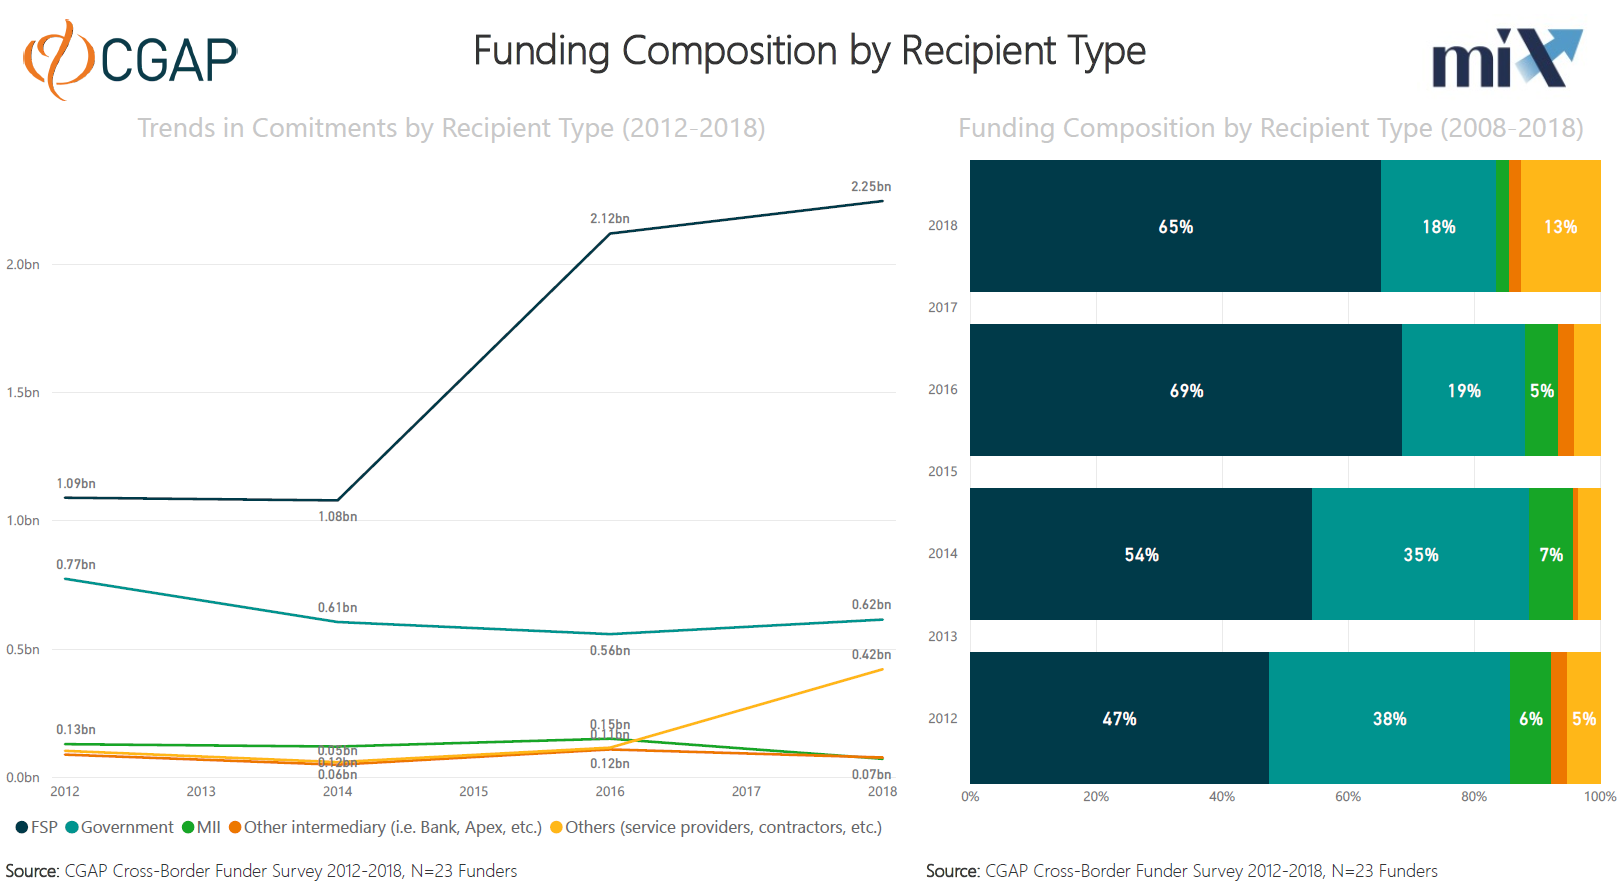 Who do funders fund in East Asia and the Pacific? (Recipients)